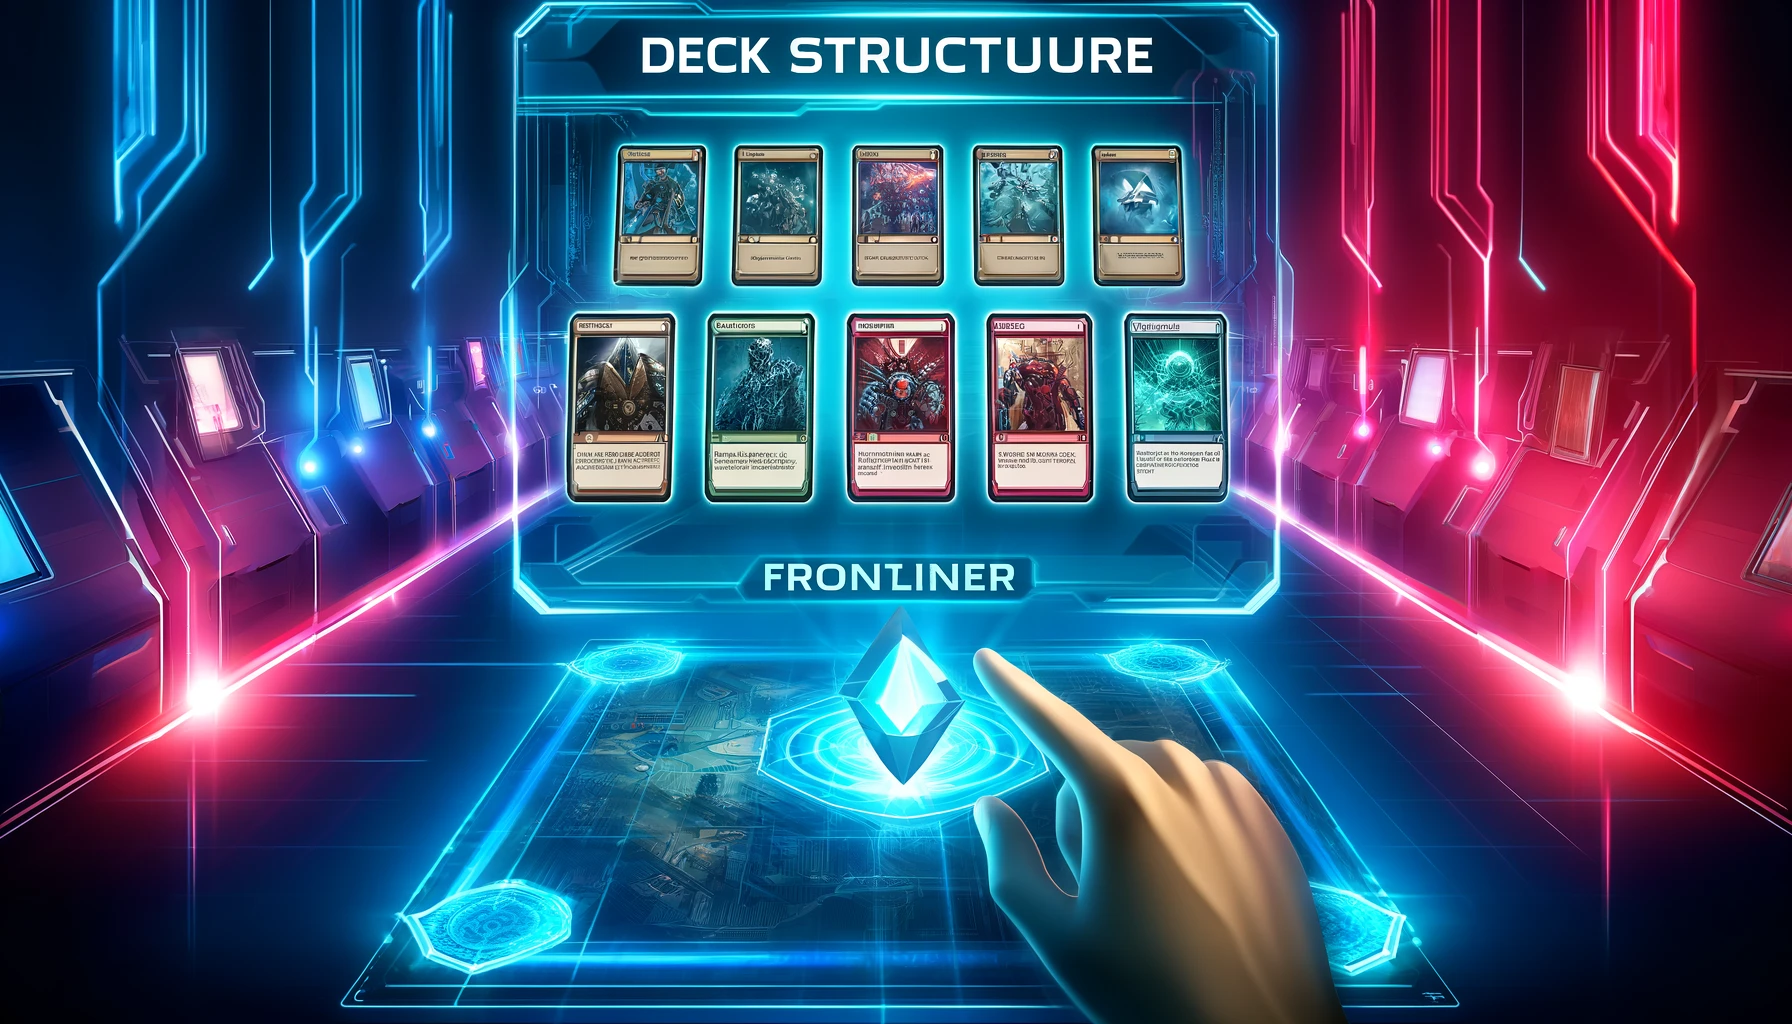 Dynamic visual of Frontliner cards in a Marvel Snap deck, highlighting their role in early game dominance.